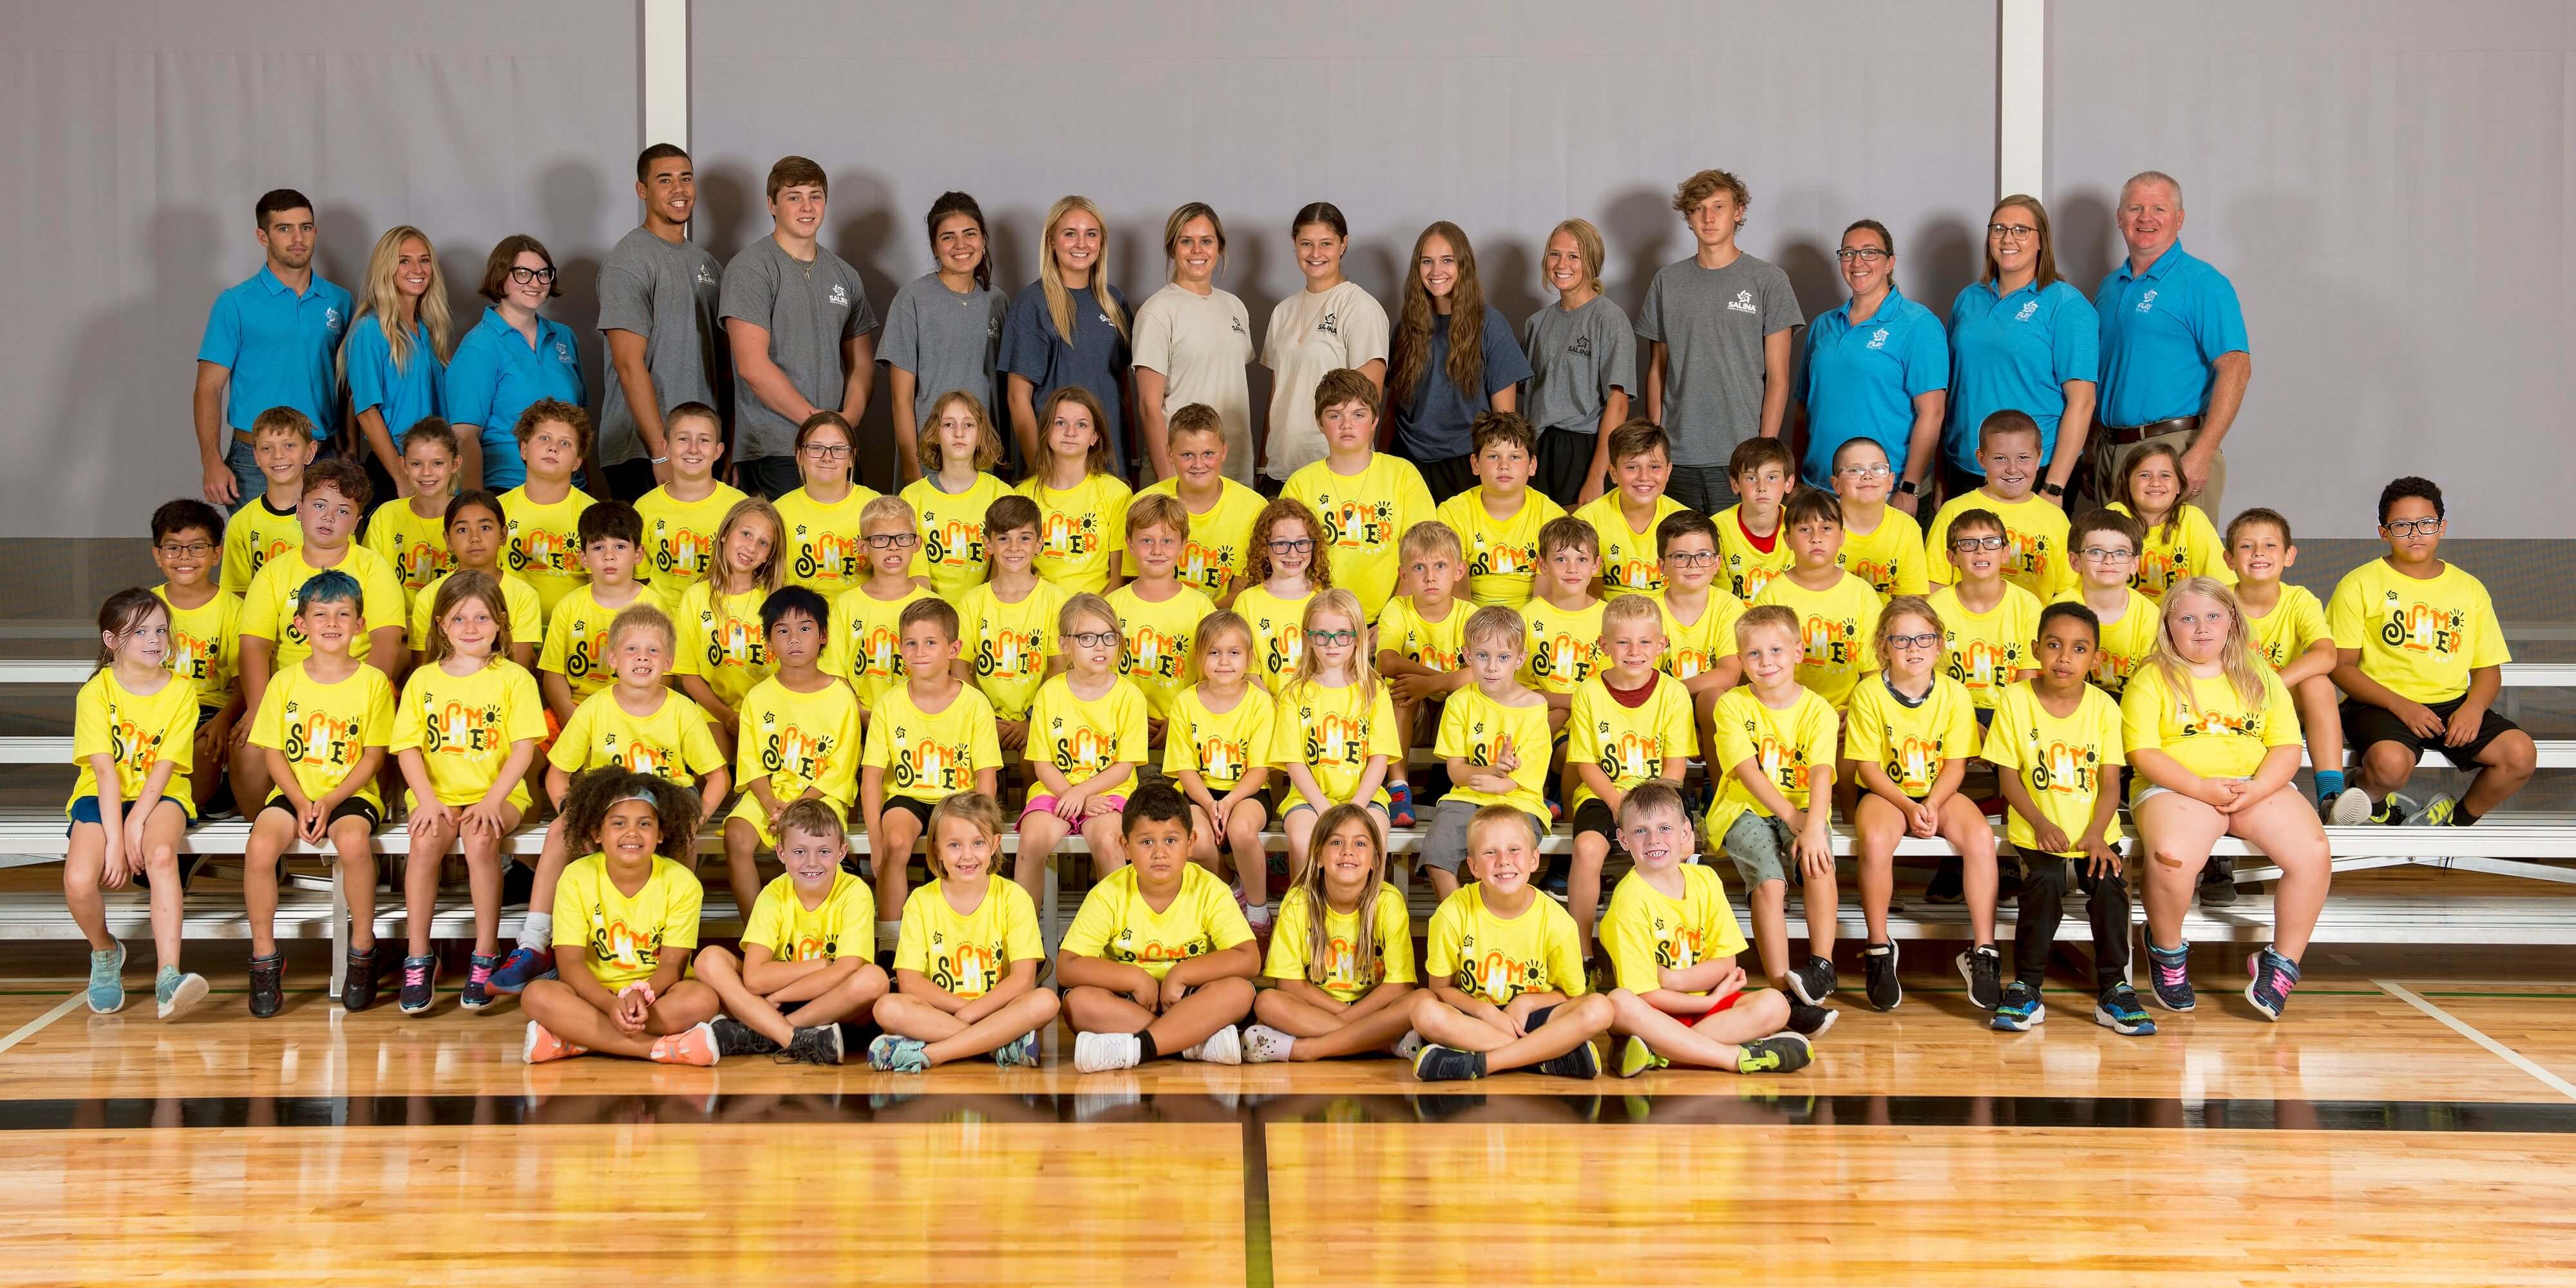 Parks and Recreation Doc/FH Camp 2022 Group.jpg